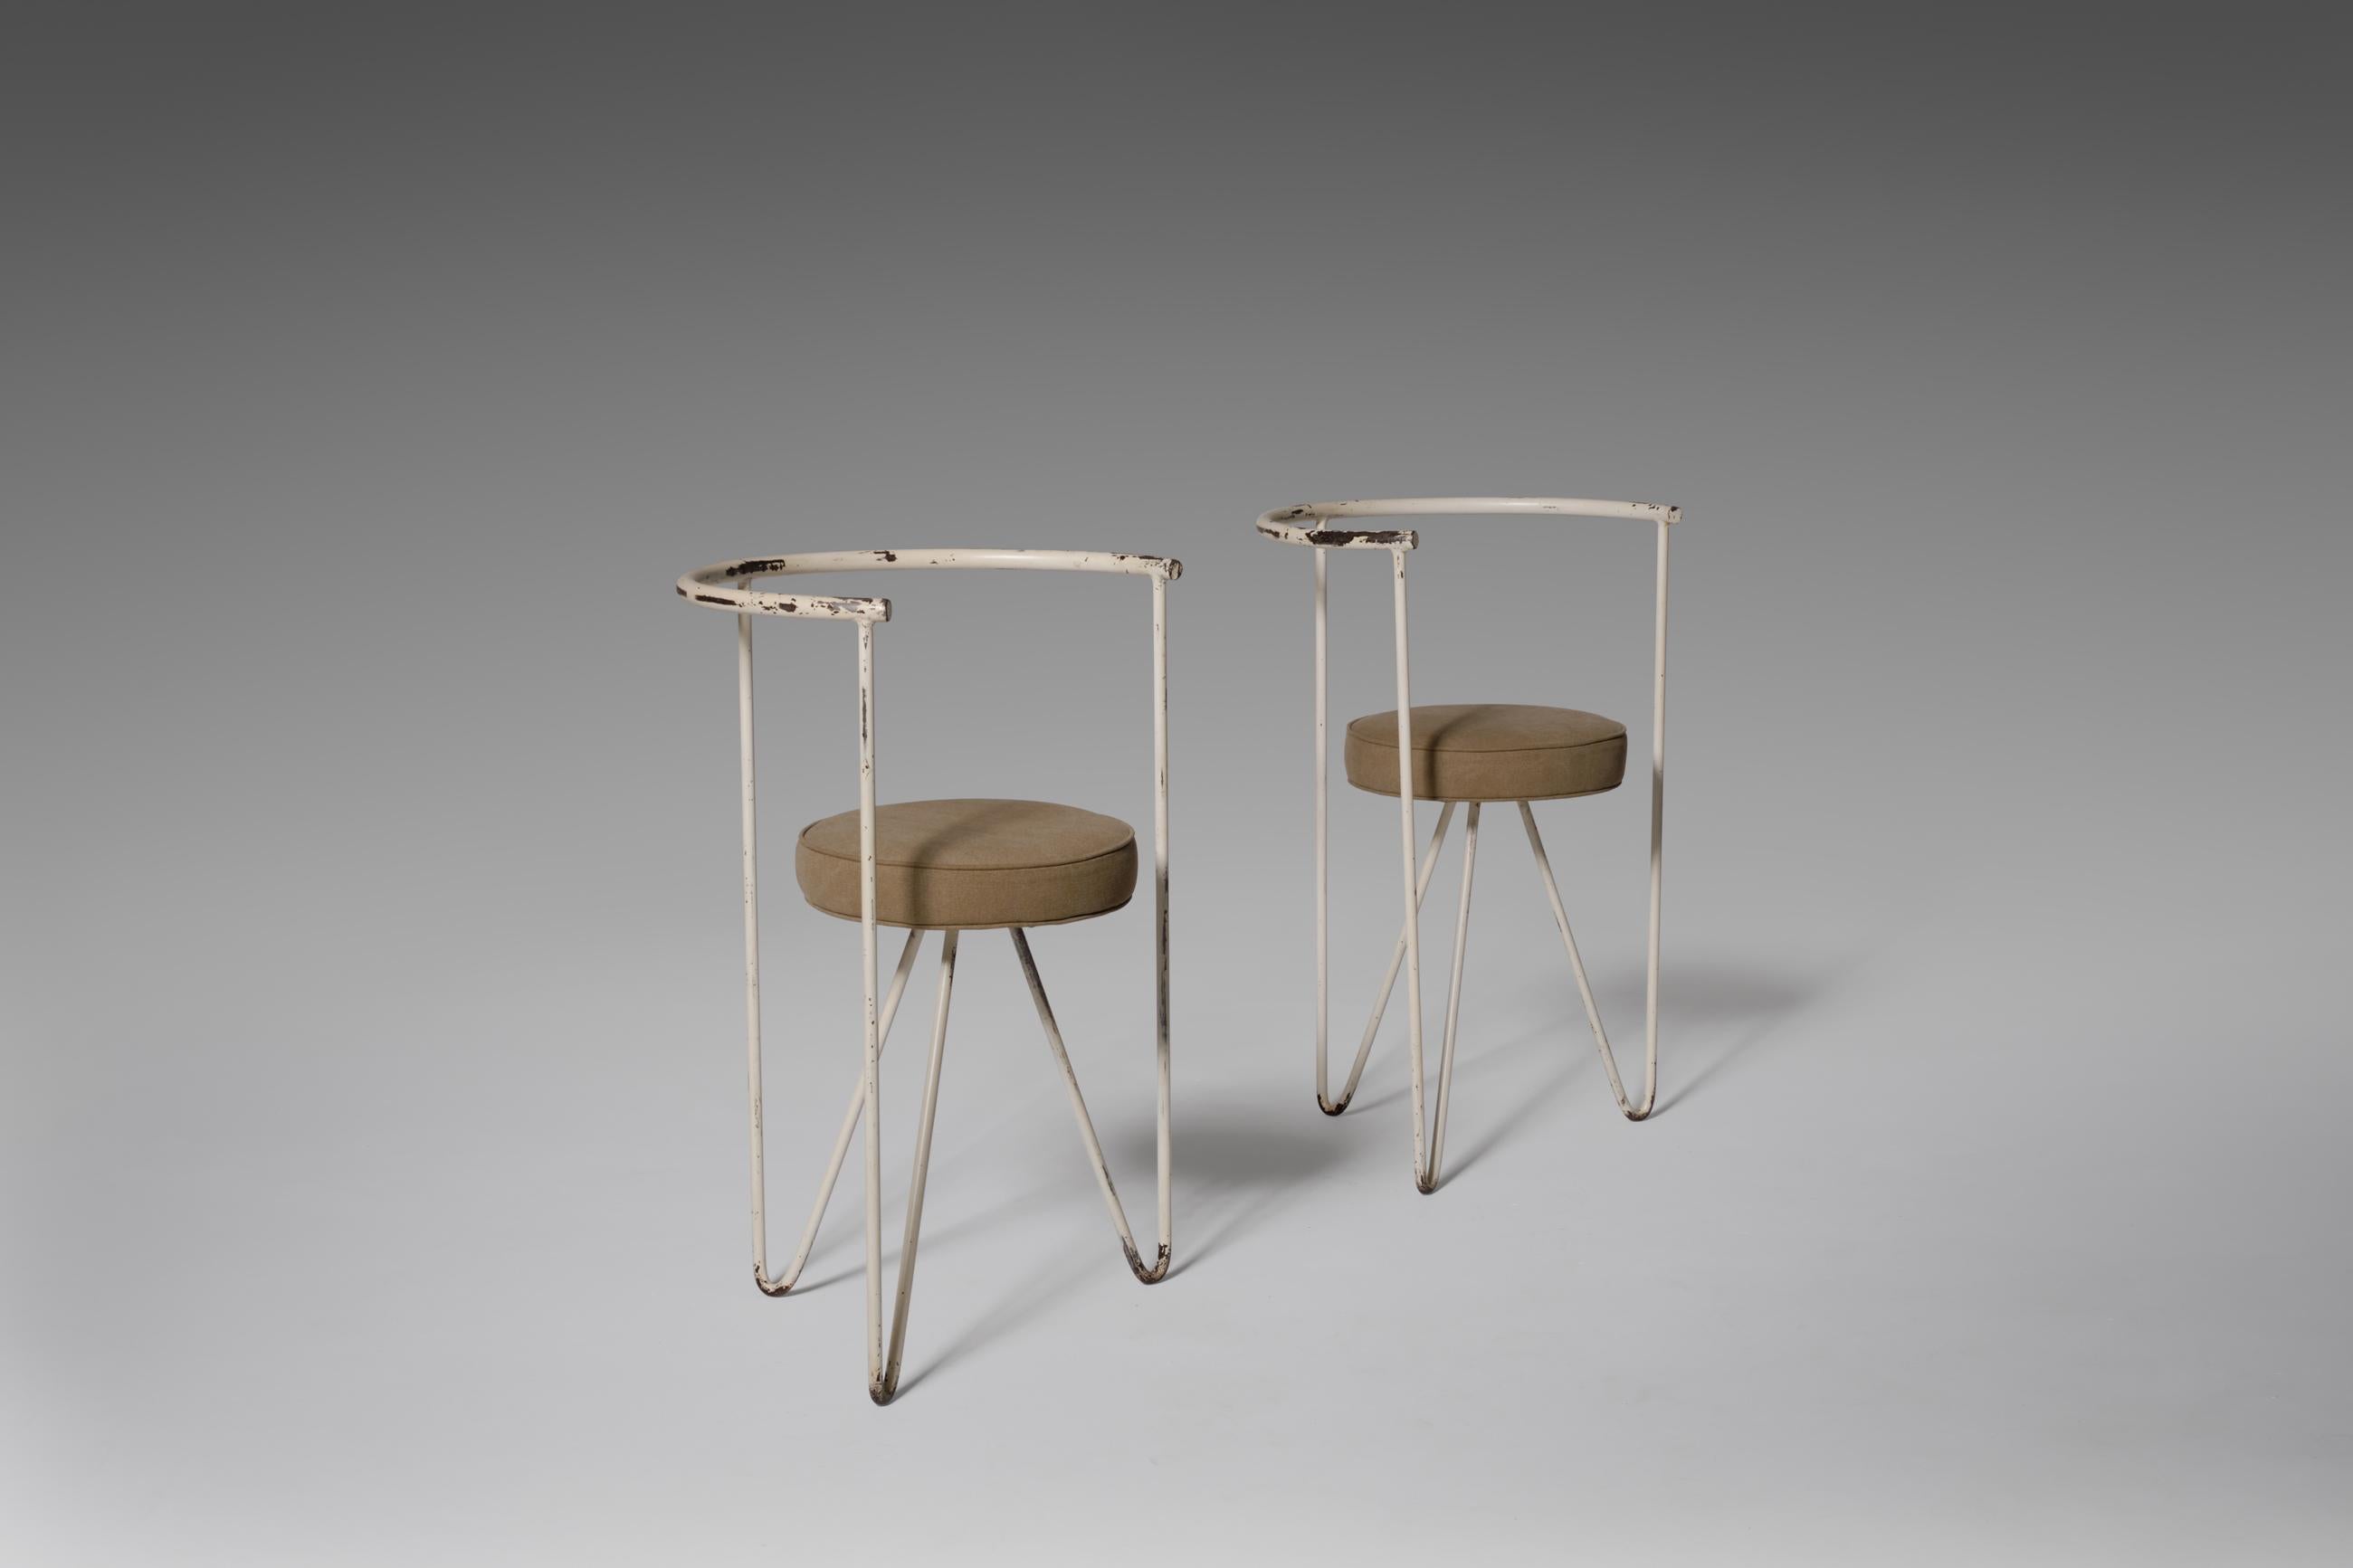 Set of two Mid-Century Modern ‘hairpin’ side chairs, 1960s. The chairs are constructed out of a white lacquered solid tubular steel frame and a round cilinder shaped seating. The frames have a stunning patina, lacquer is partly faded which is